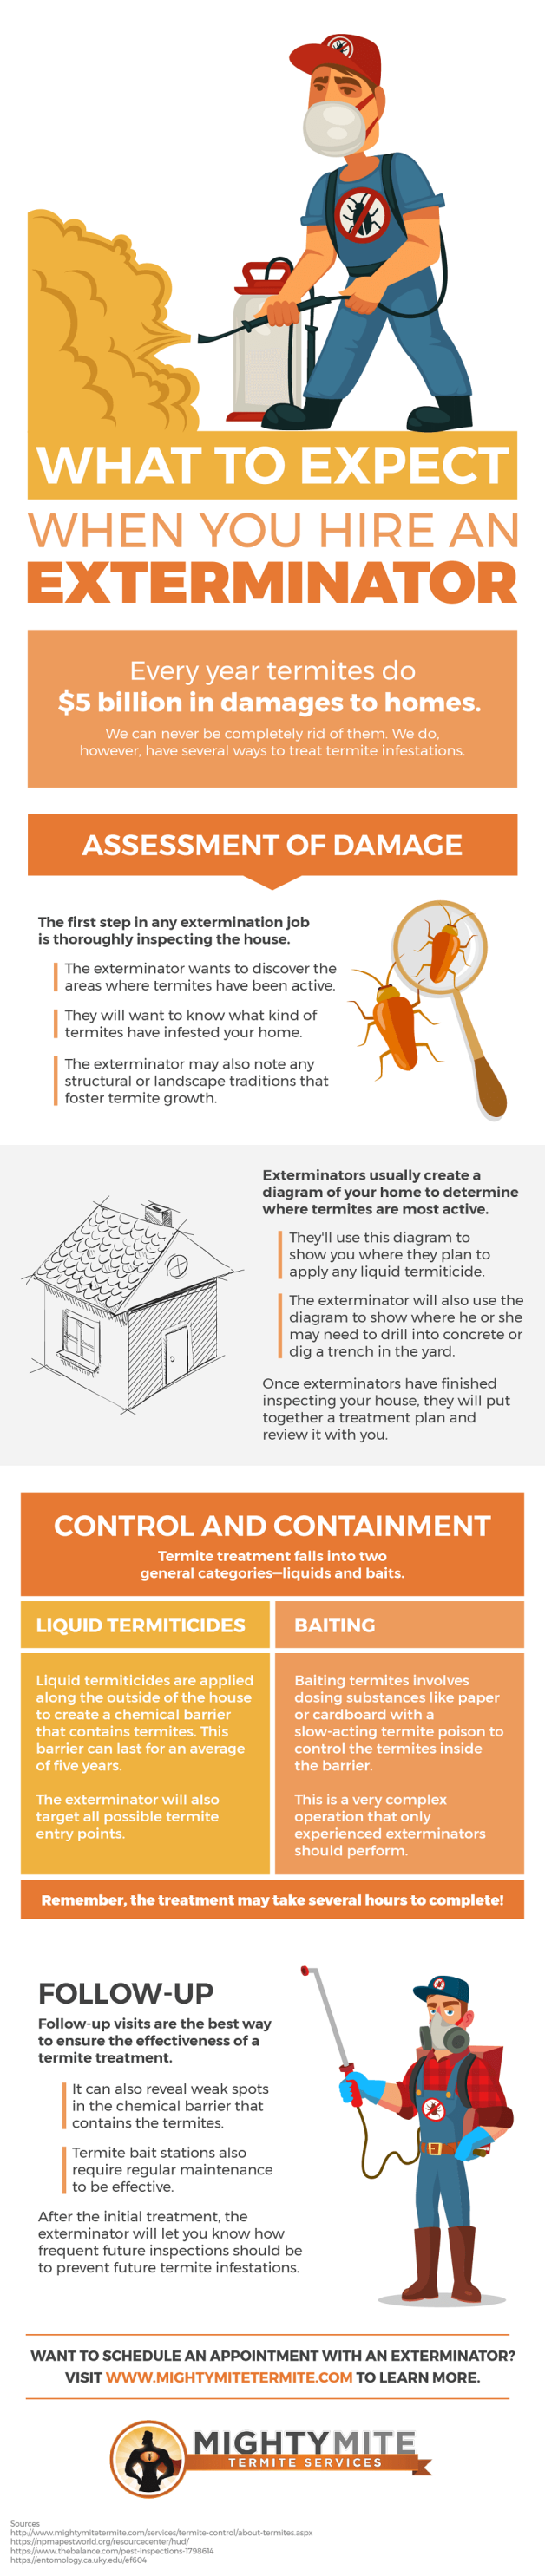 What to Expect When You Hire an Exterminator